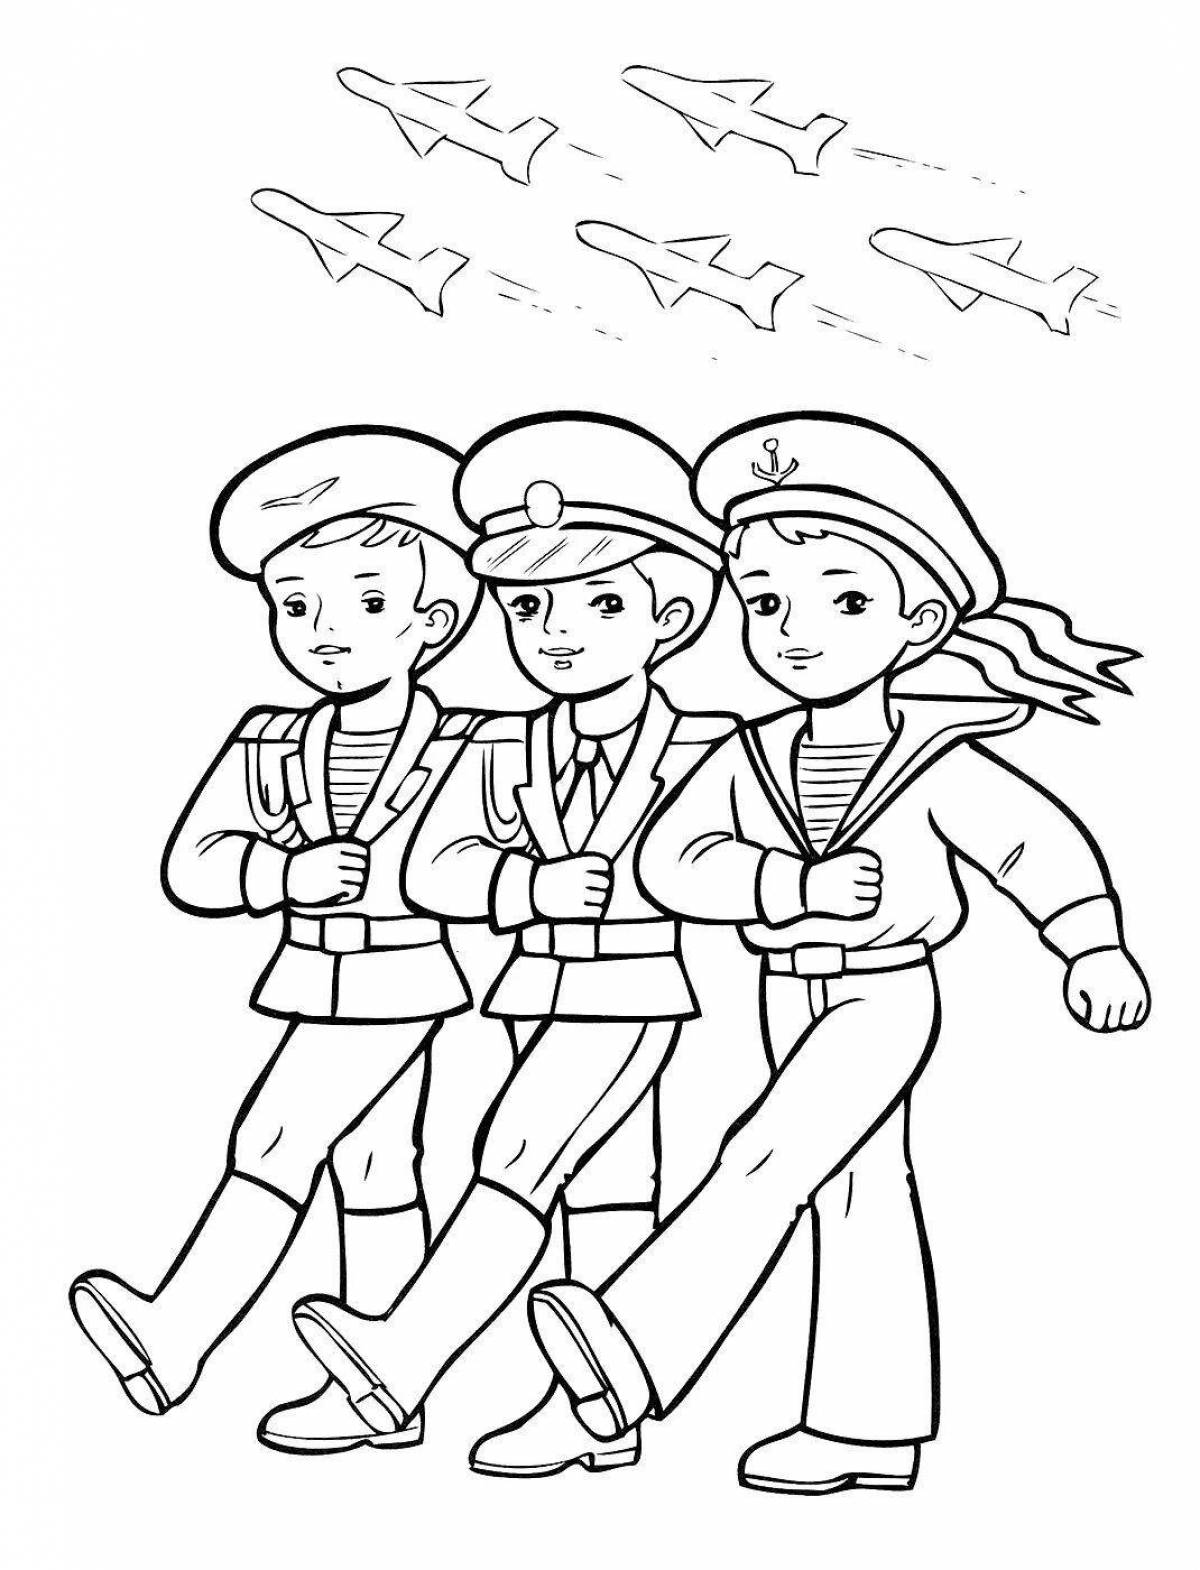 Military soldier coloring page